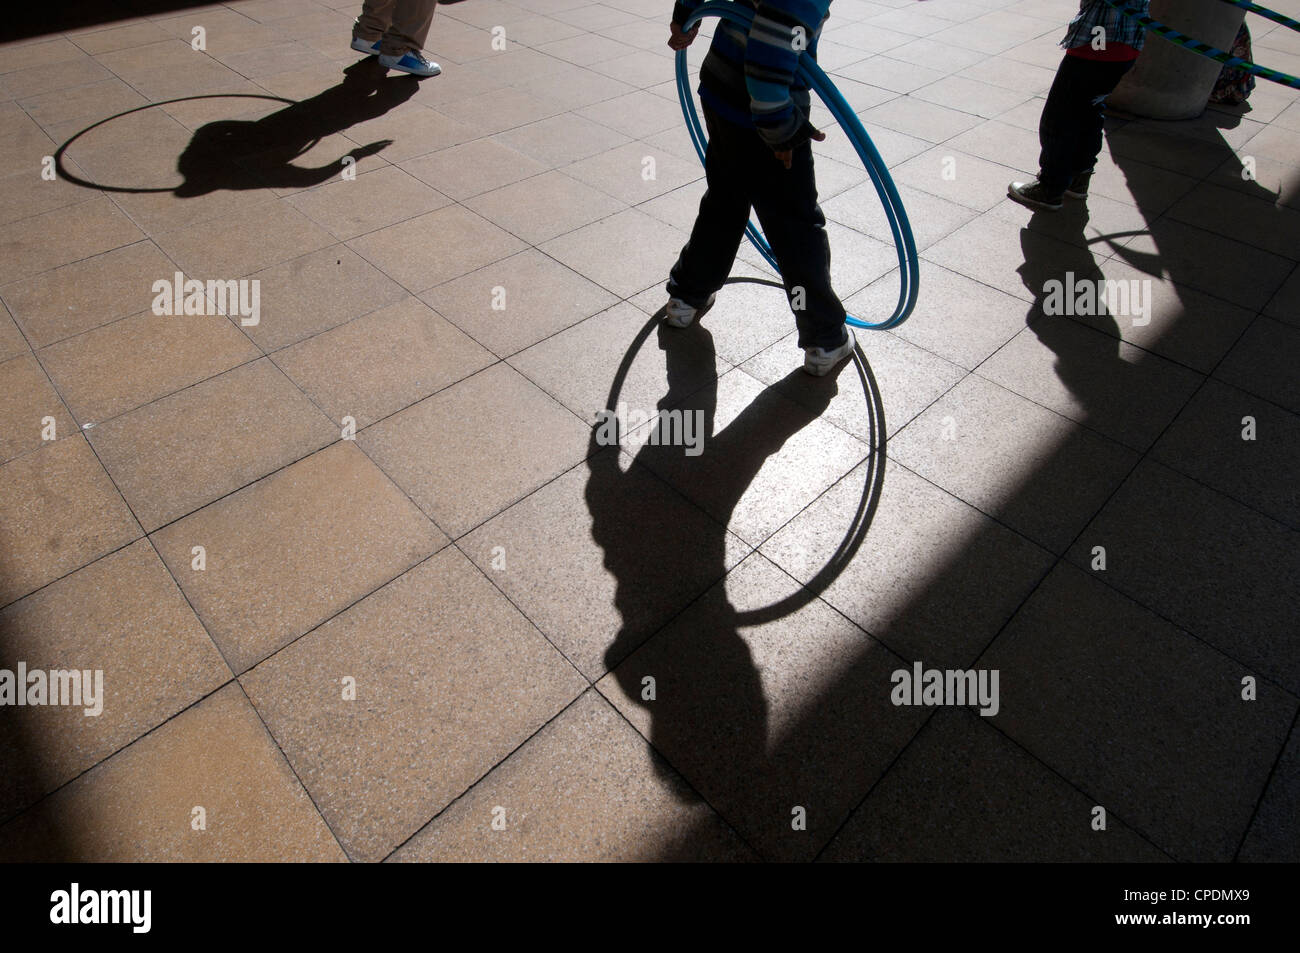 Hackney Central Library. Shadow of children playing with hula hoops Stock Photo